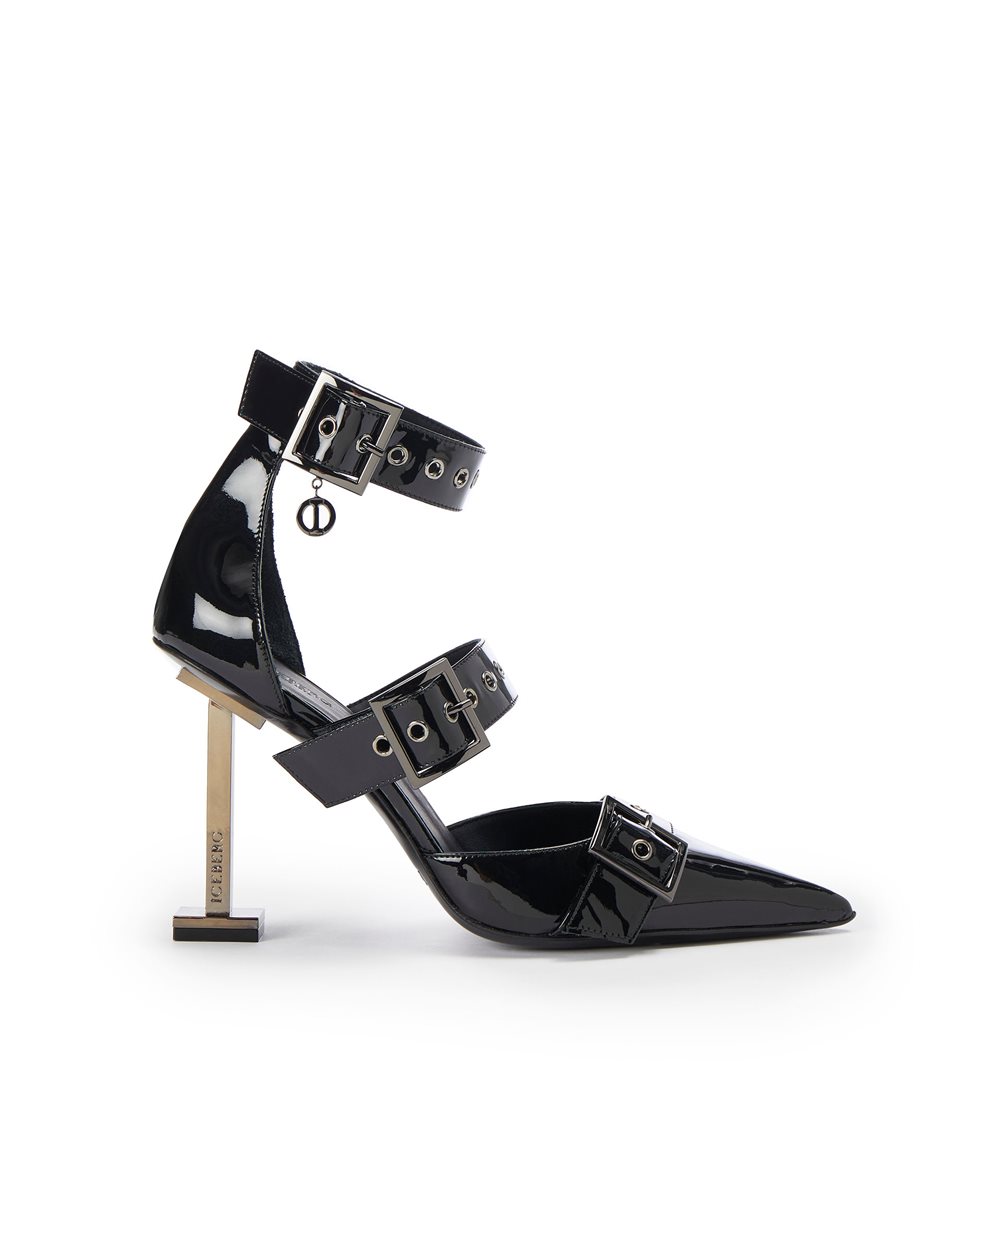 Black pumps with iconic heel - Iceberg - Official Website